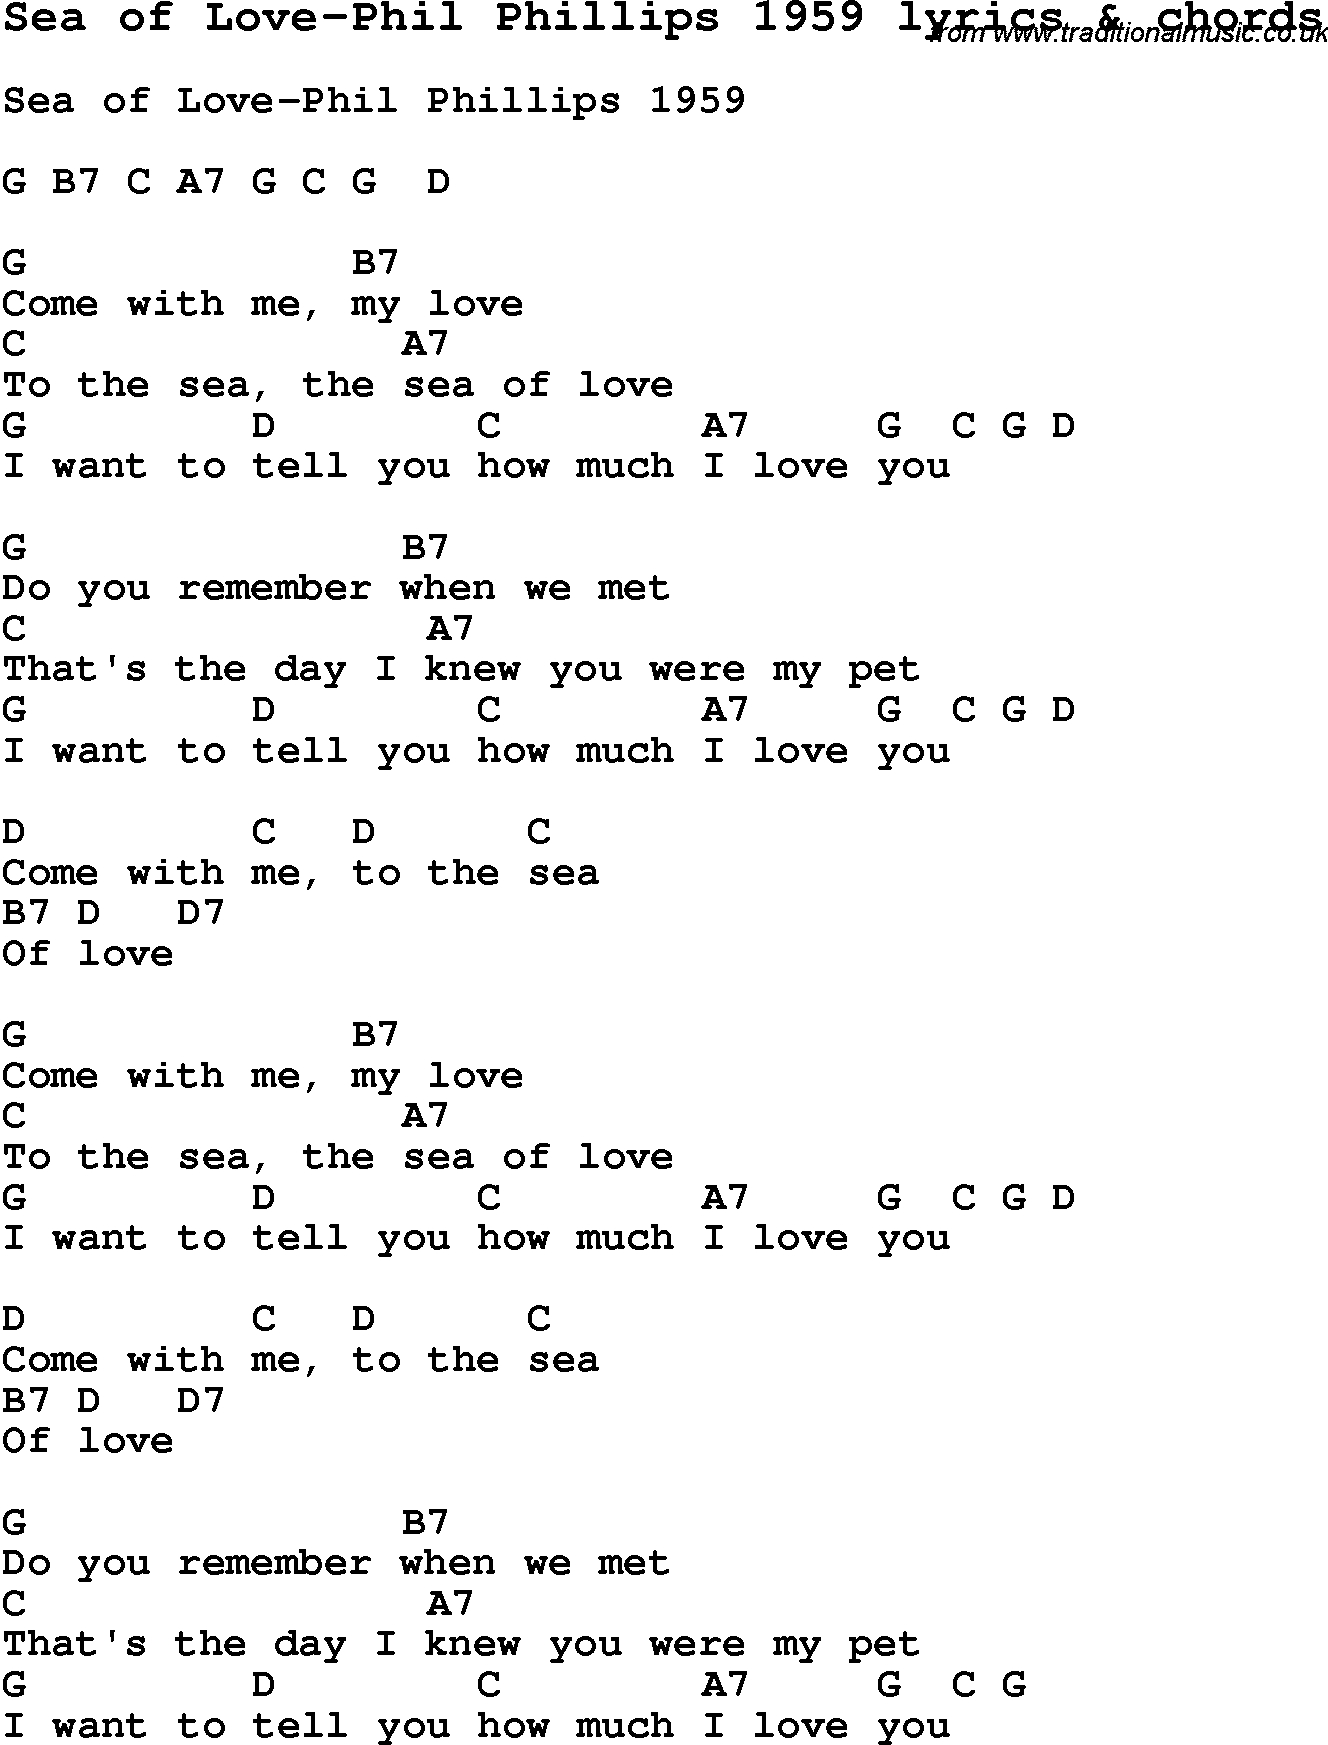 Sea Of Love Chords Love Song Lyrics Forsea Of Love Phil Phillips 1959 With Chords